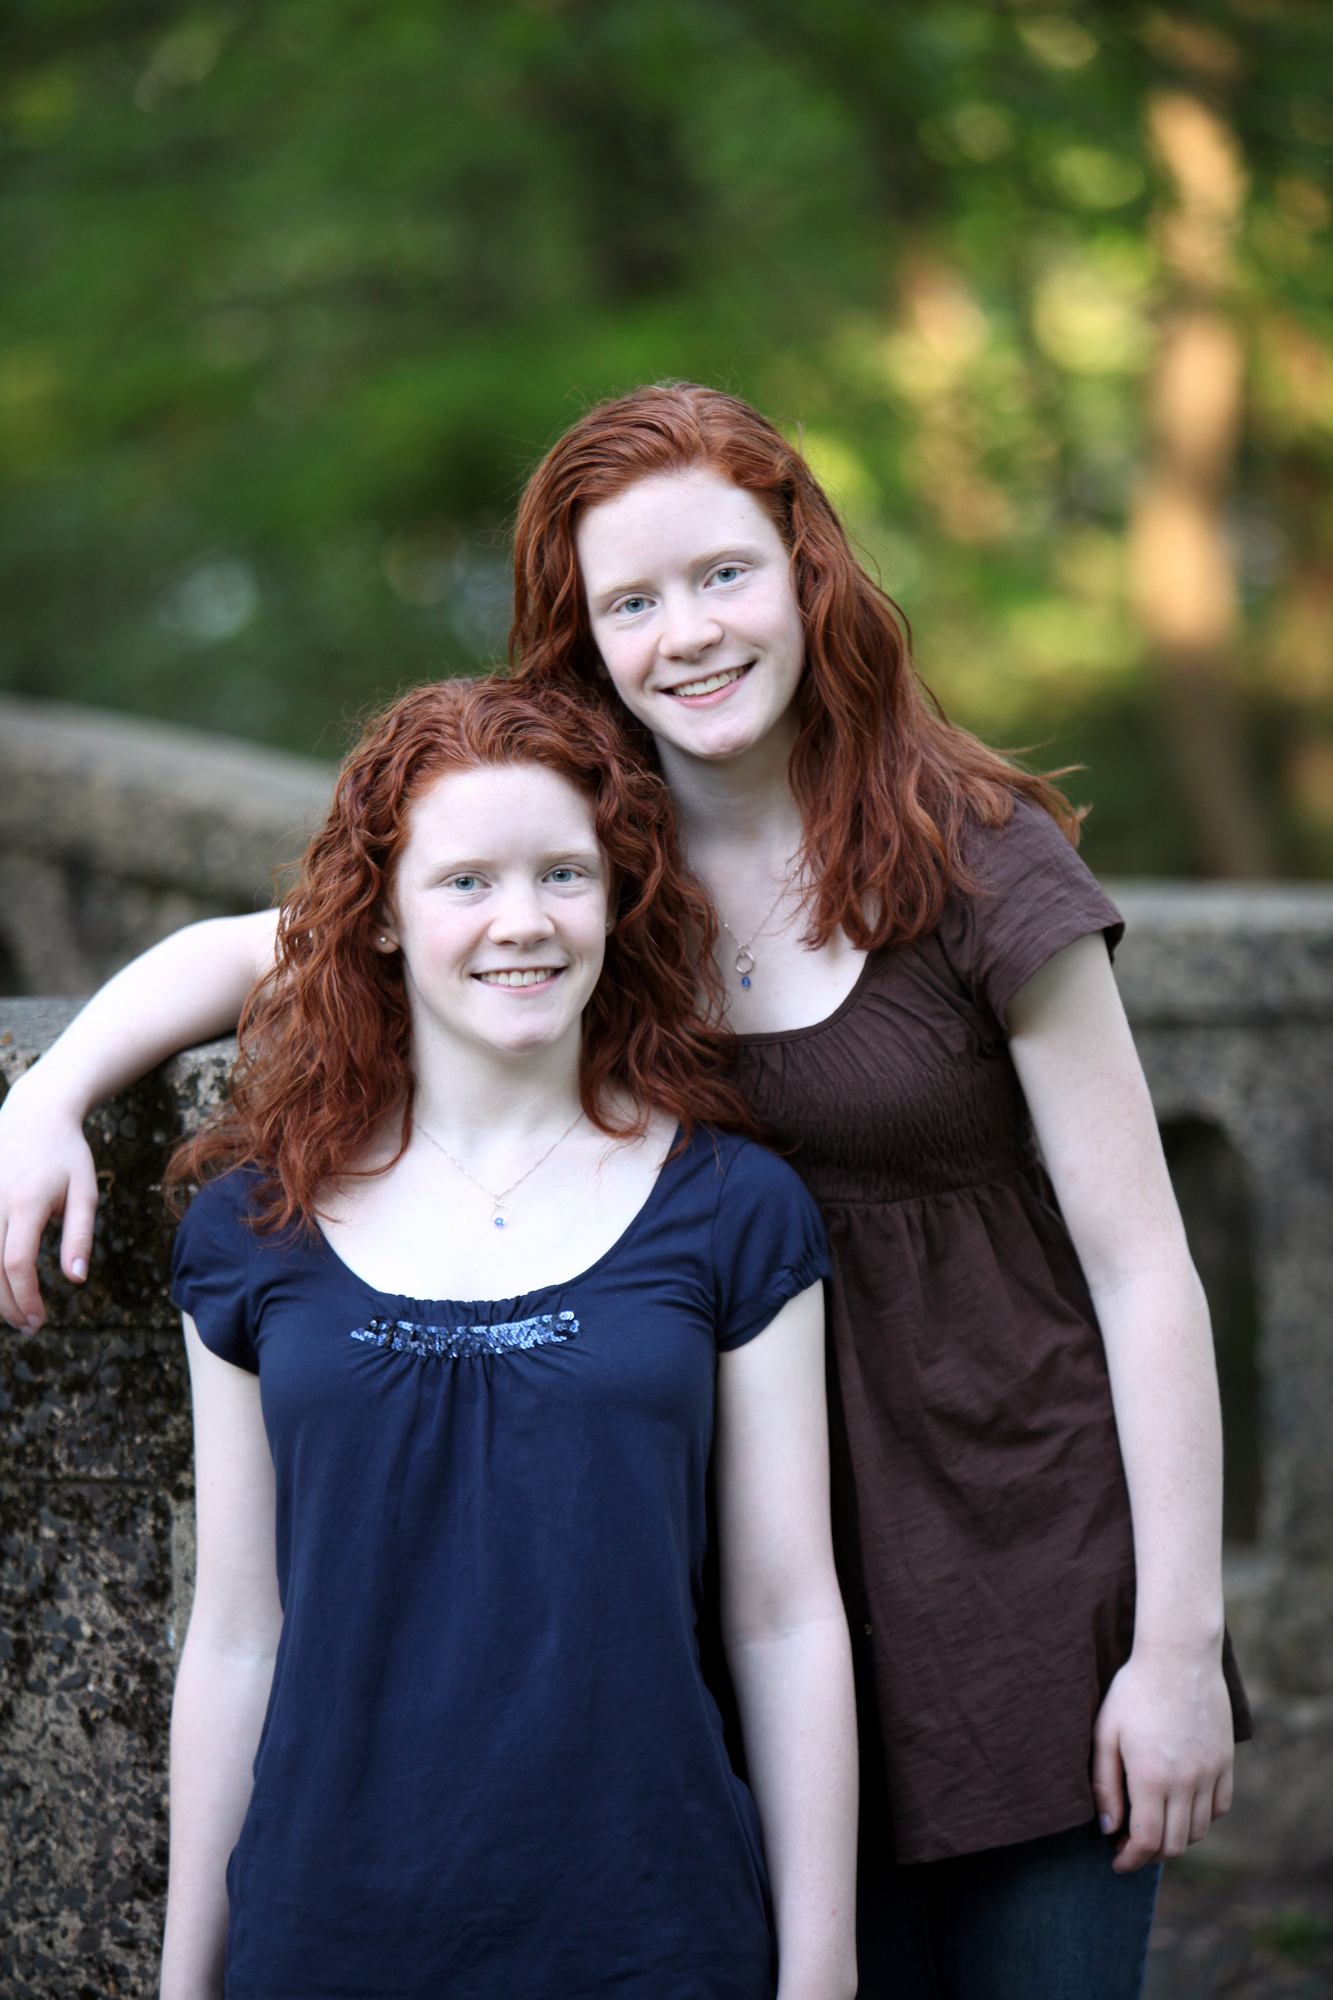 Grace Aronds and her twin sister, Jane Aronds at a photo shoot in the Spring of 2010.